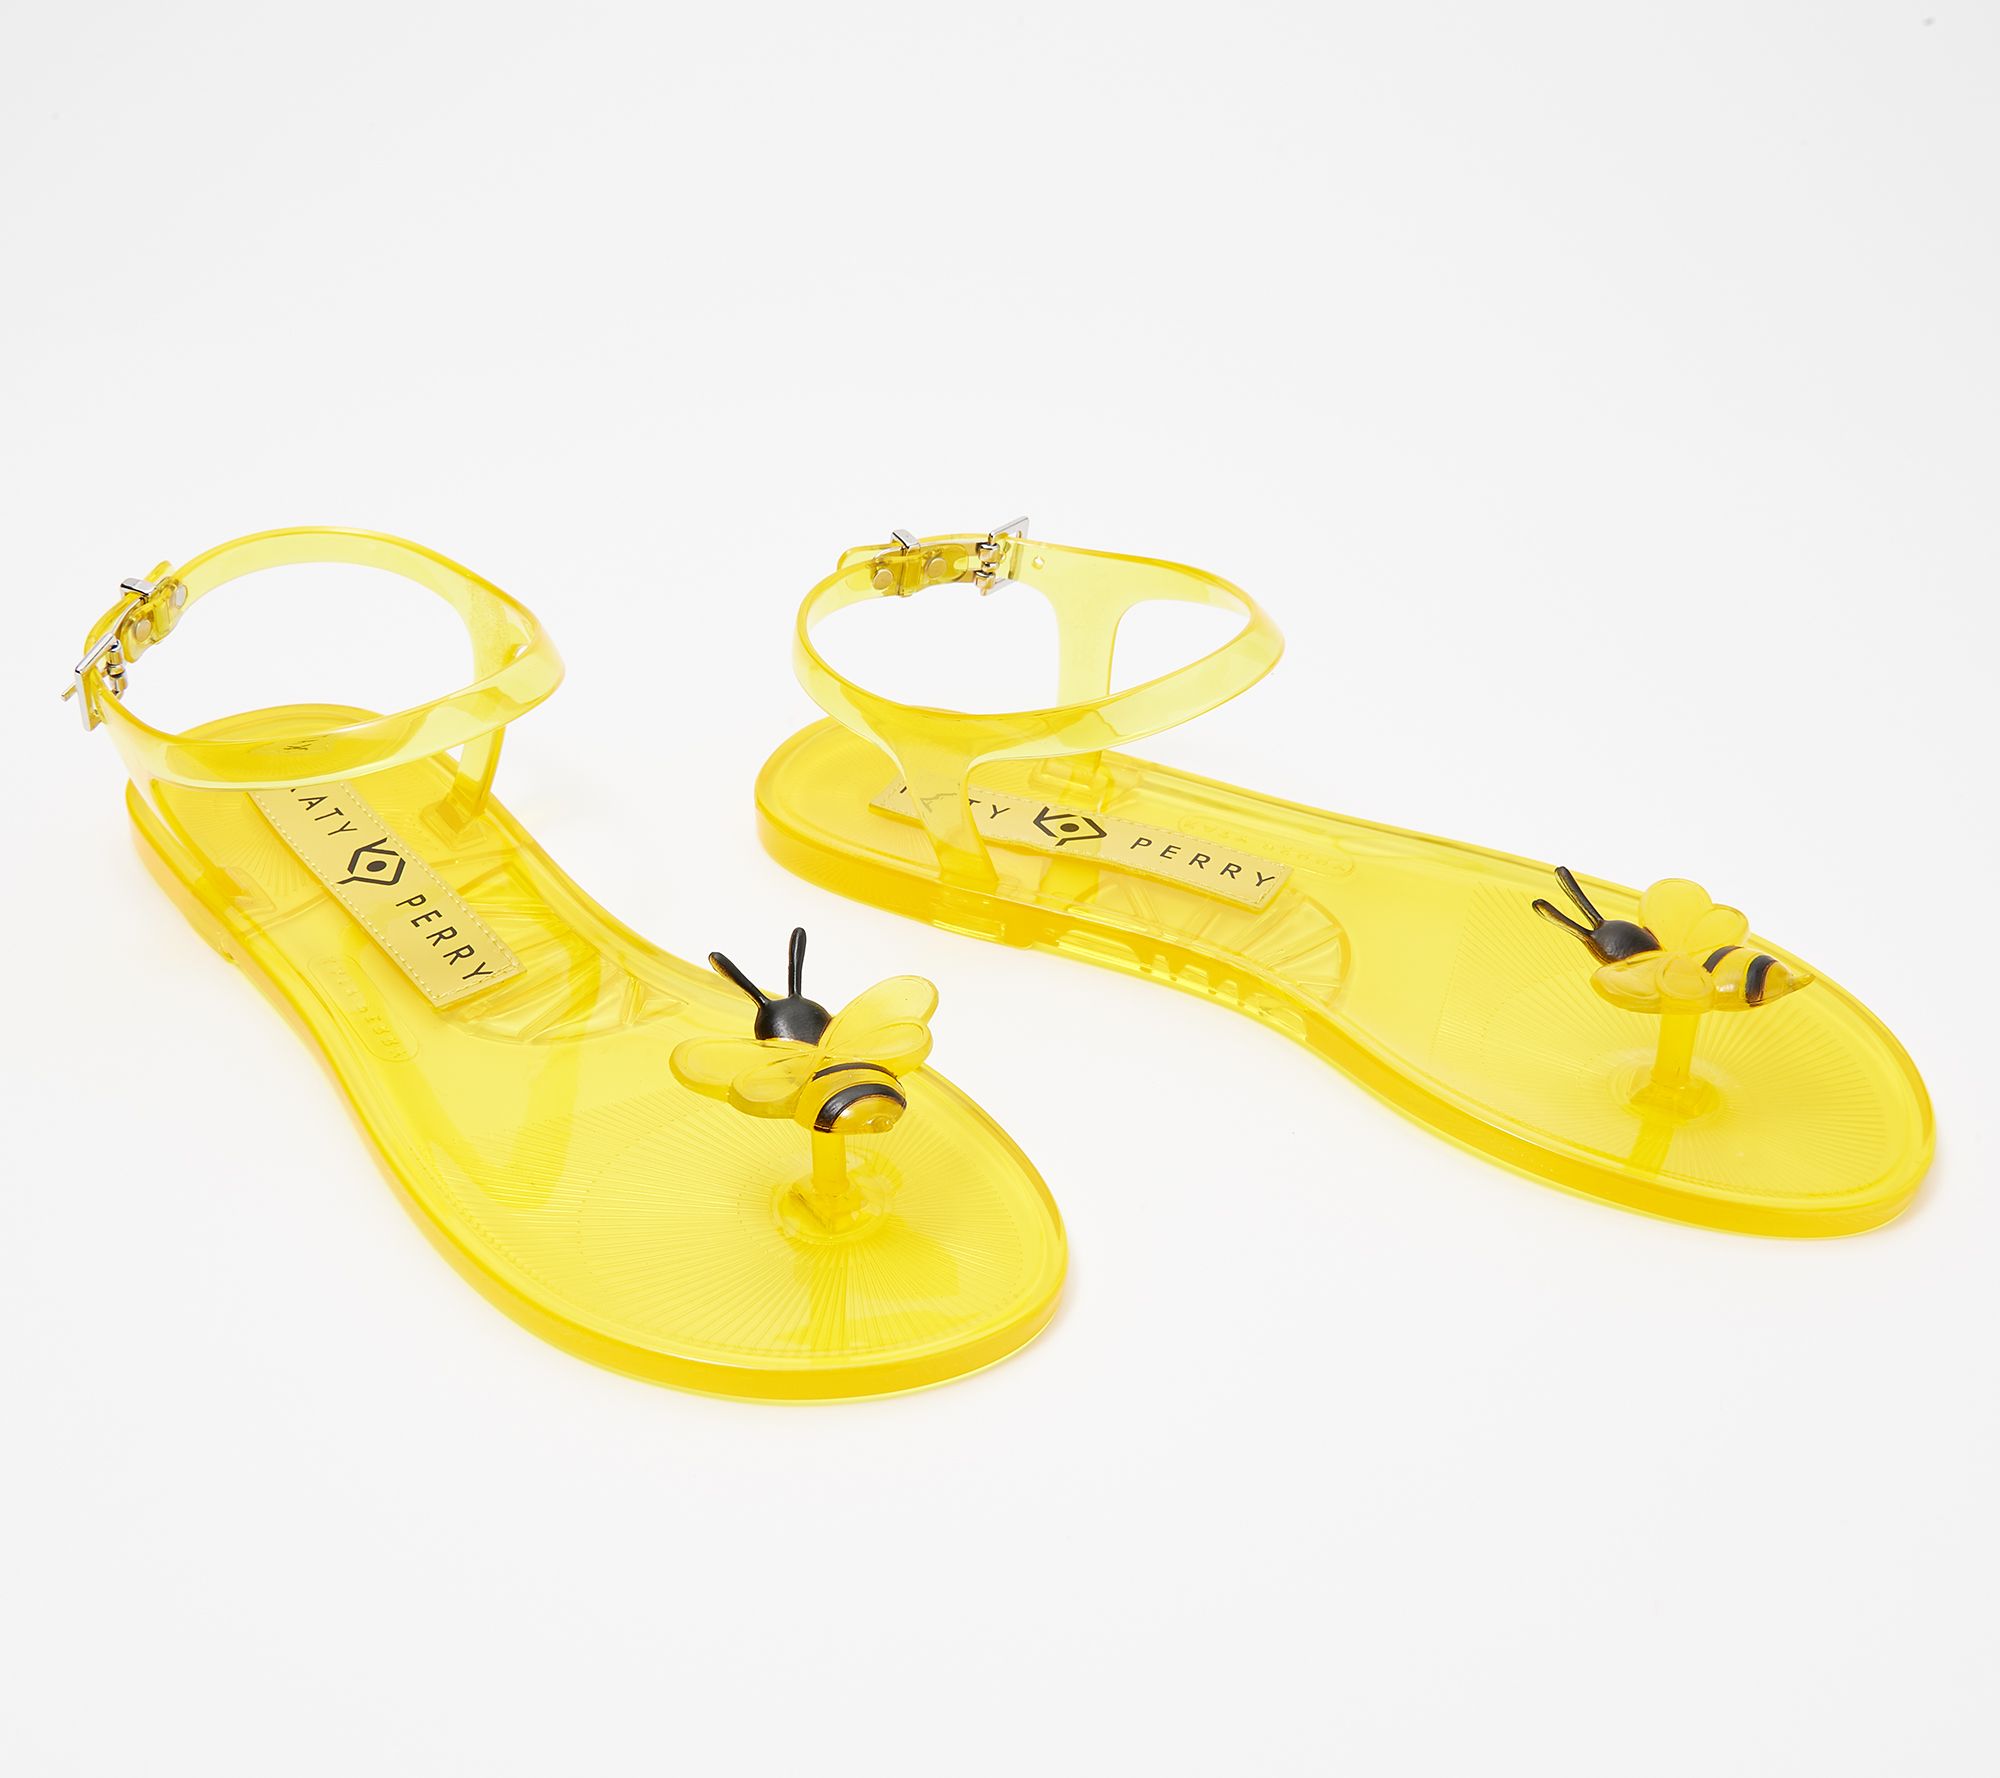 Katy Perry Sandals - The Geli - QVC.com